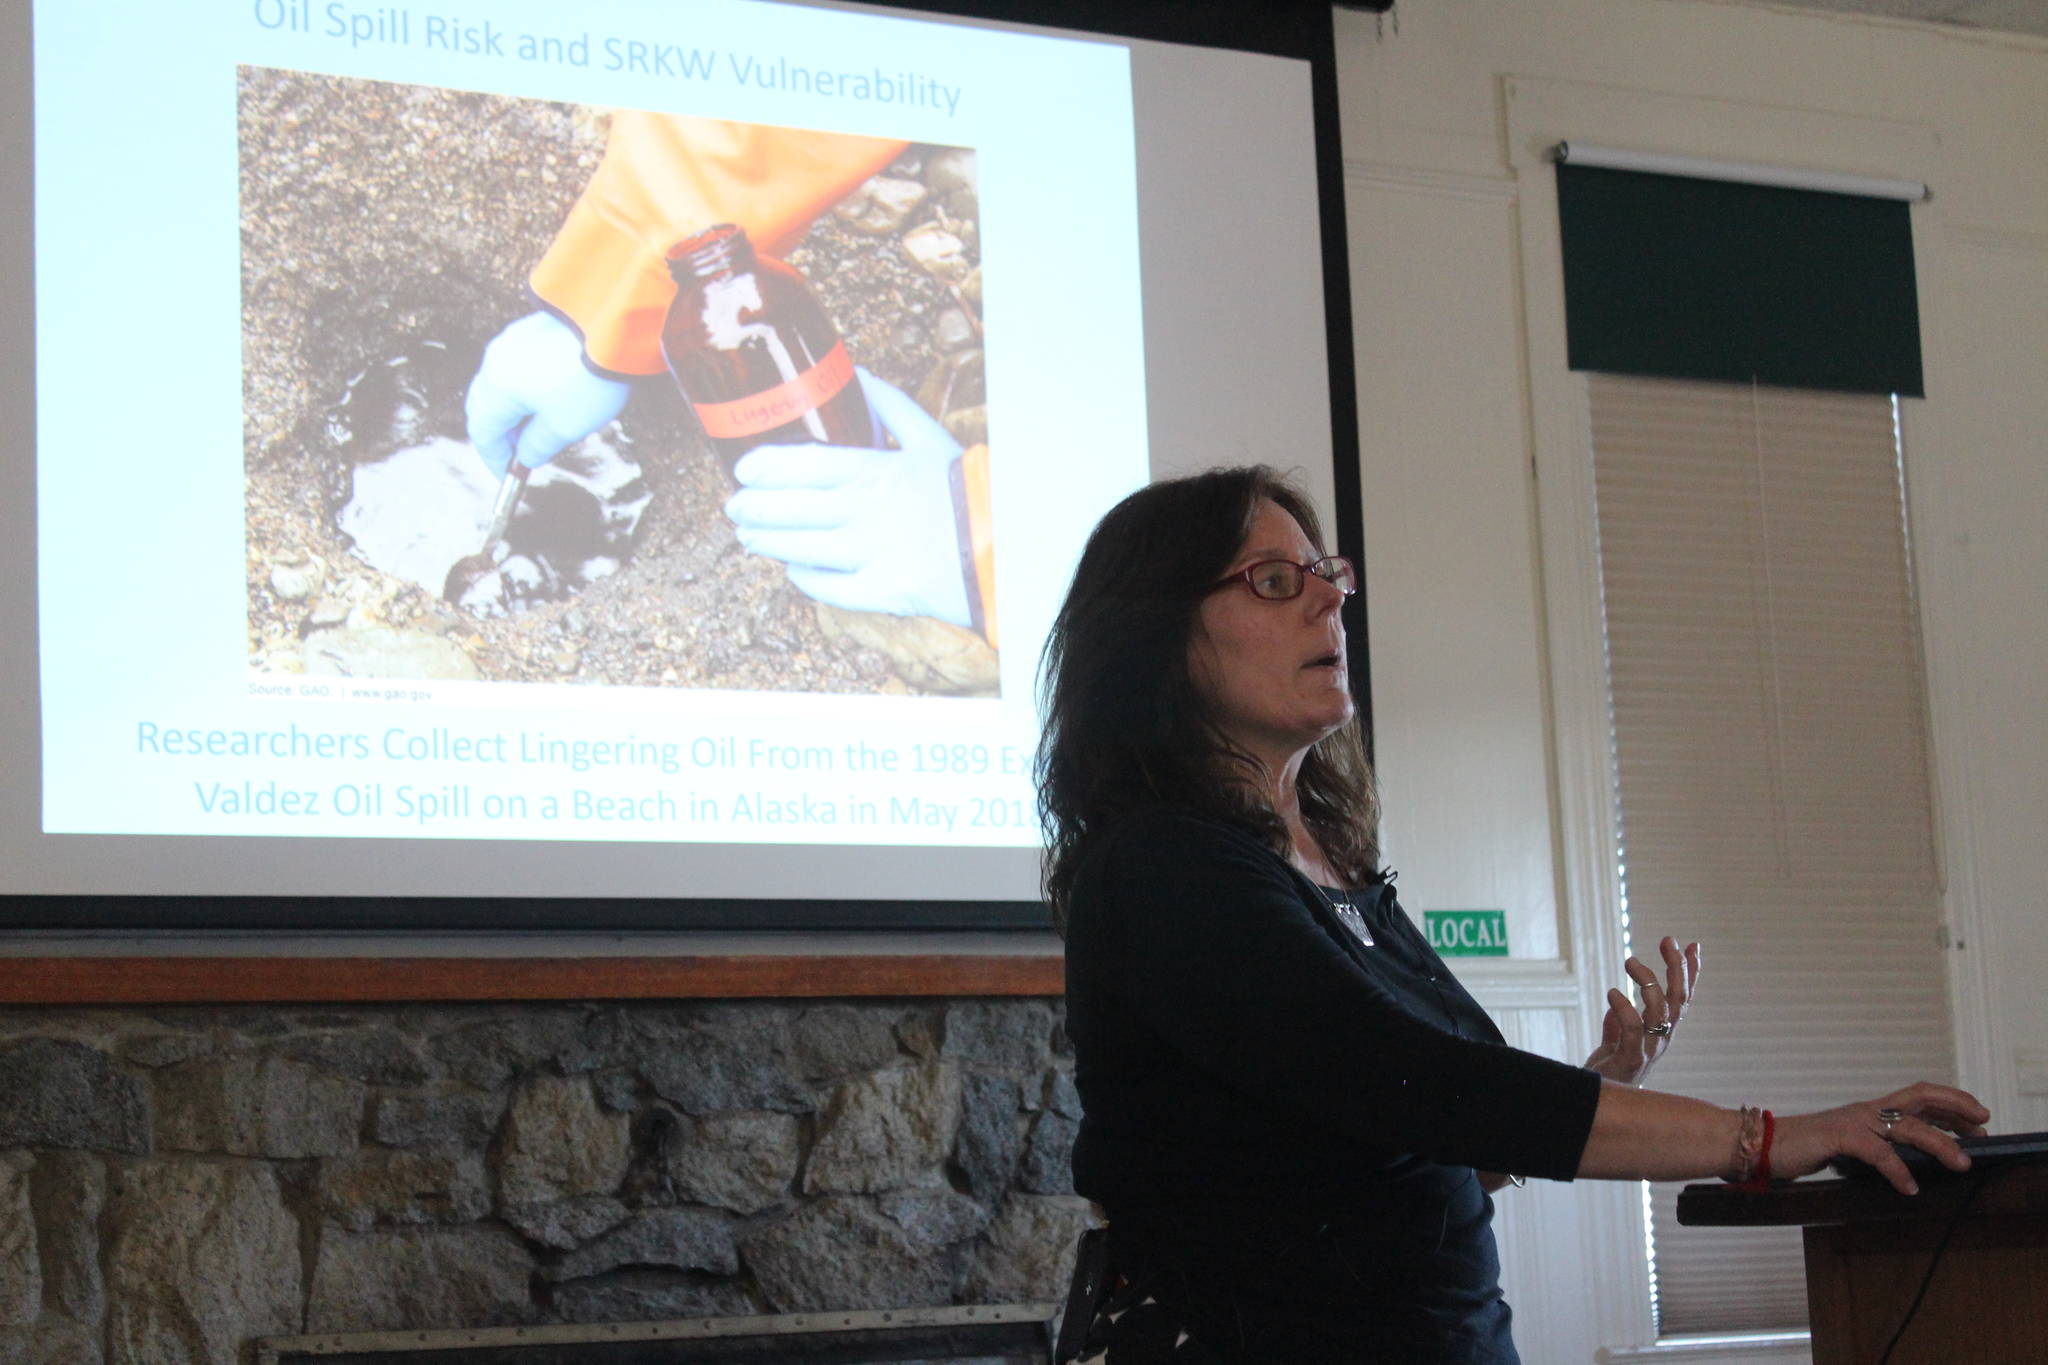 Orca talk inspires action